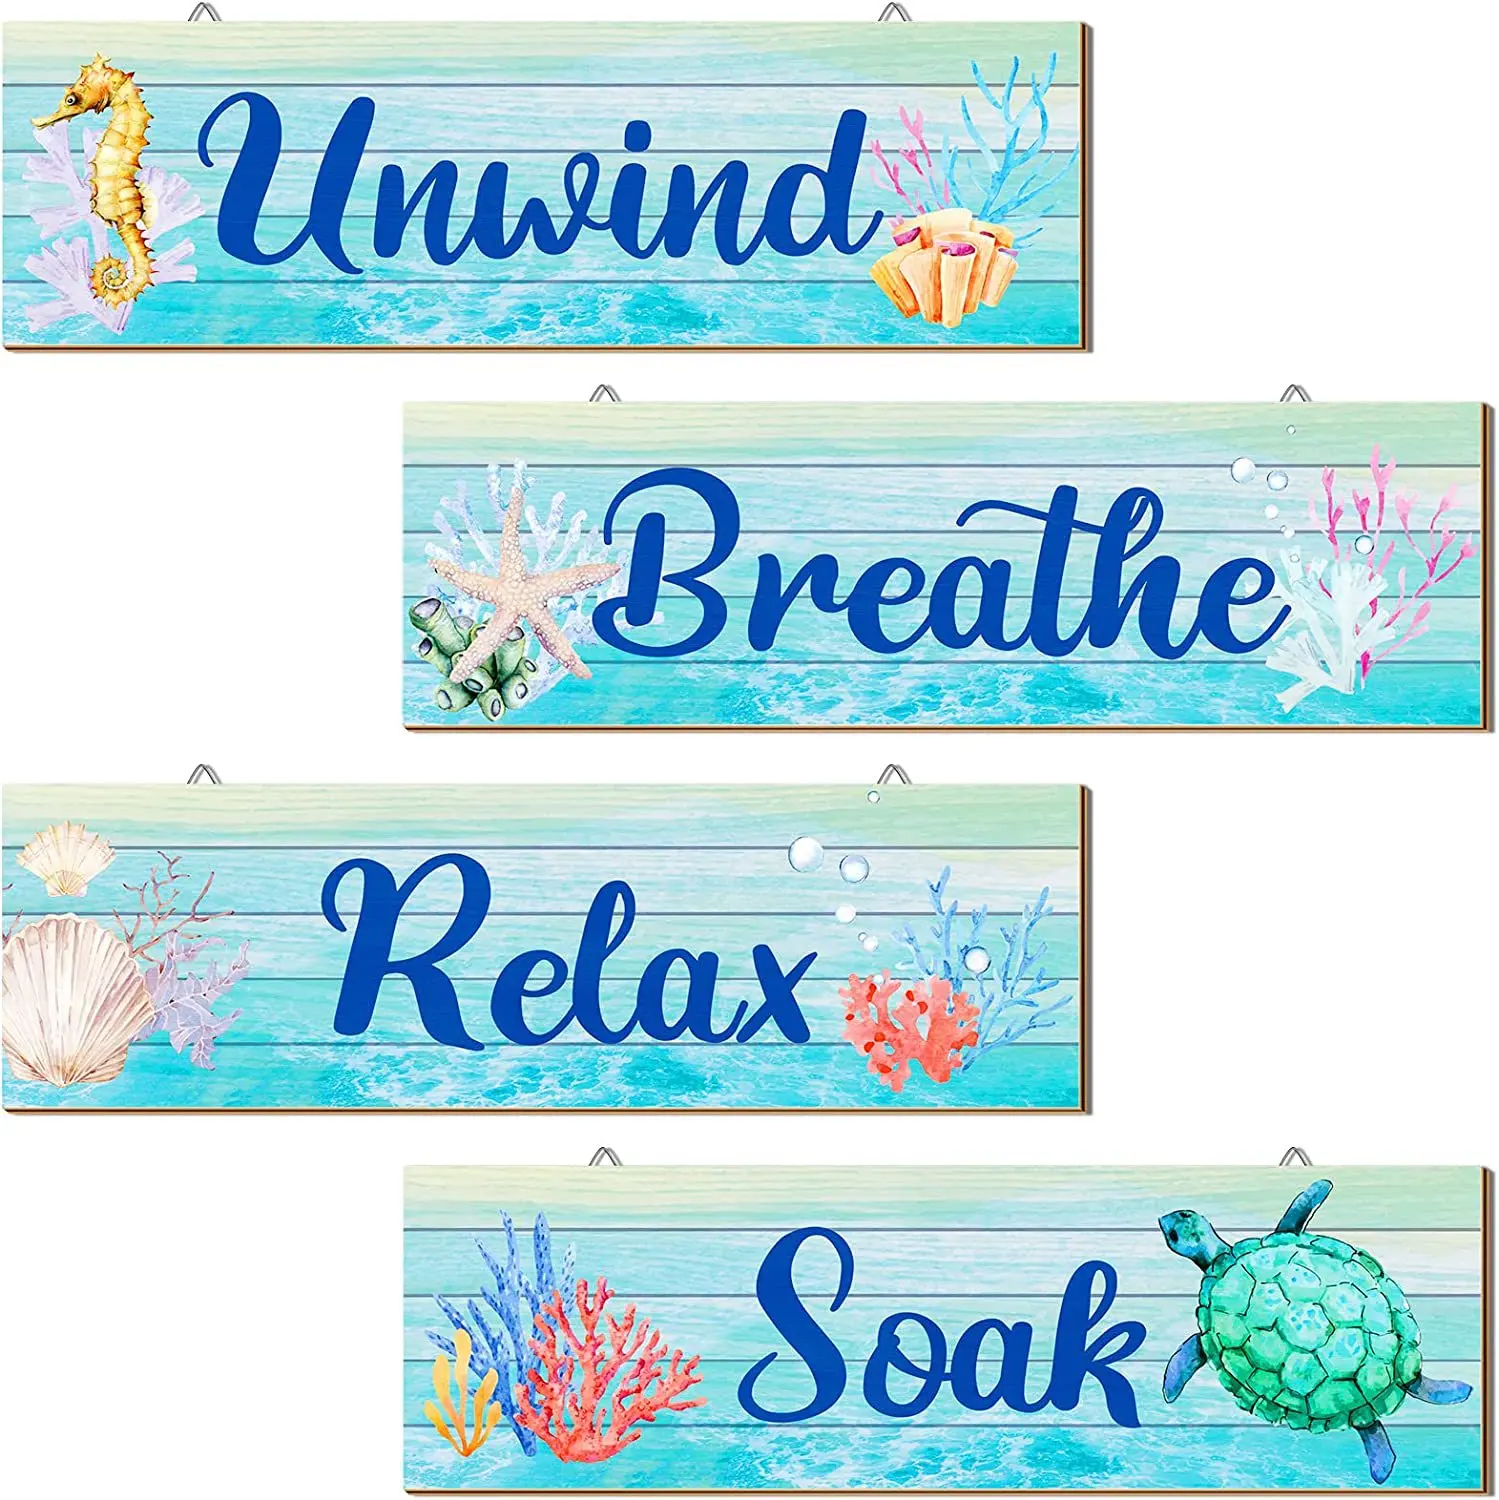 Summer Wooden Hanging Sign Ocean Atmosphere Wall Decor Amazon Living Room Wall Decor Room Decoration